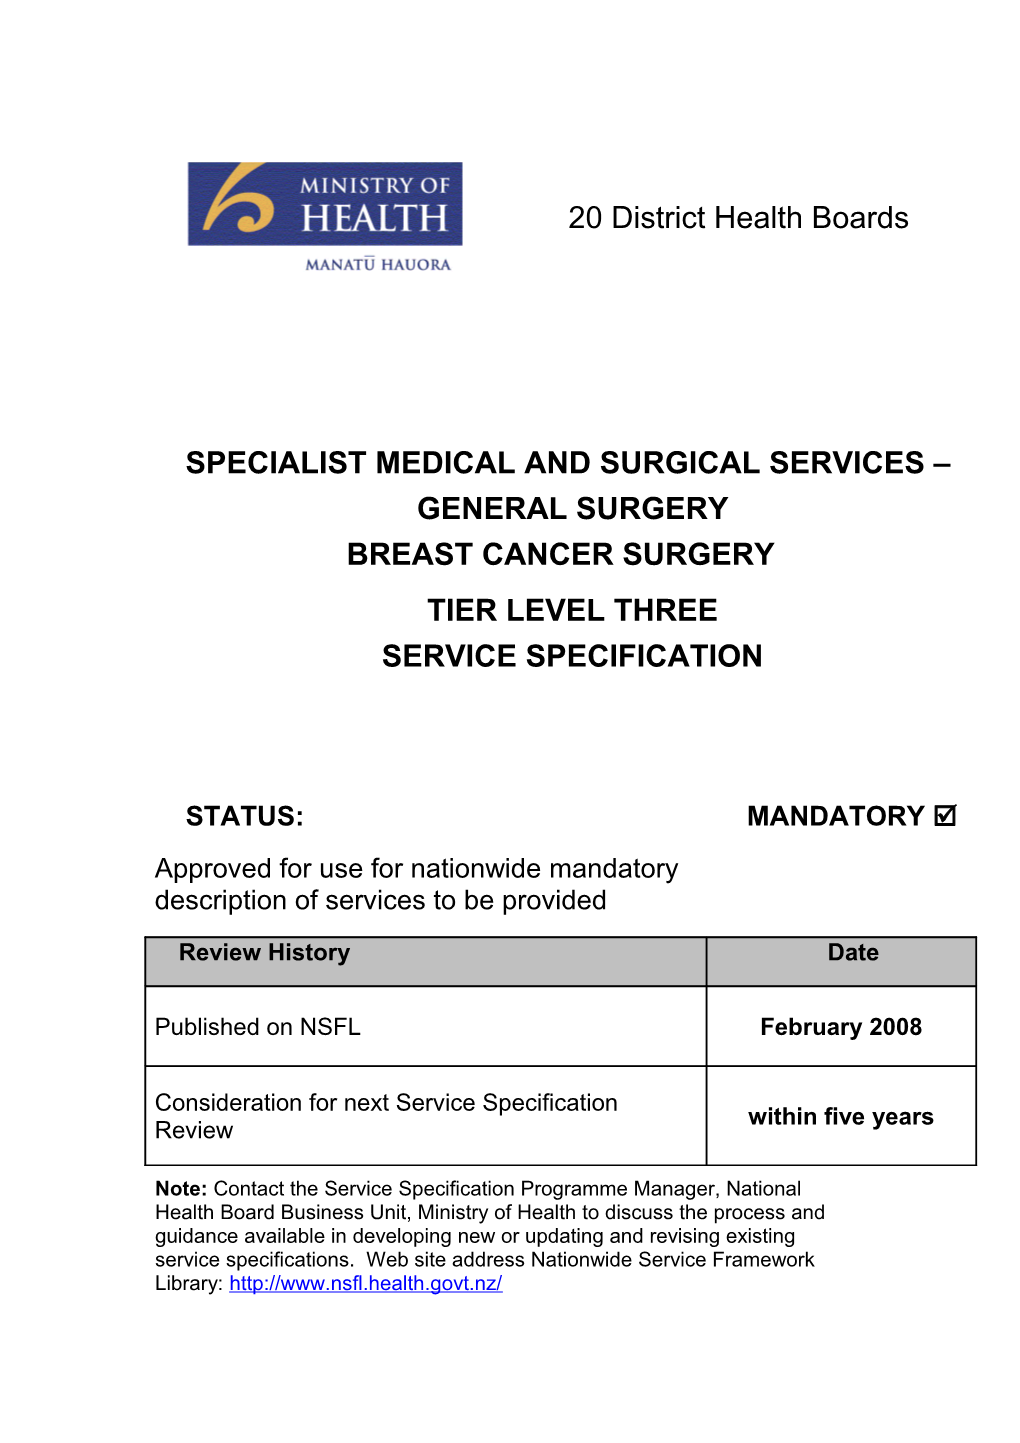 Specialist Medical and Surgical Services